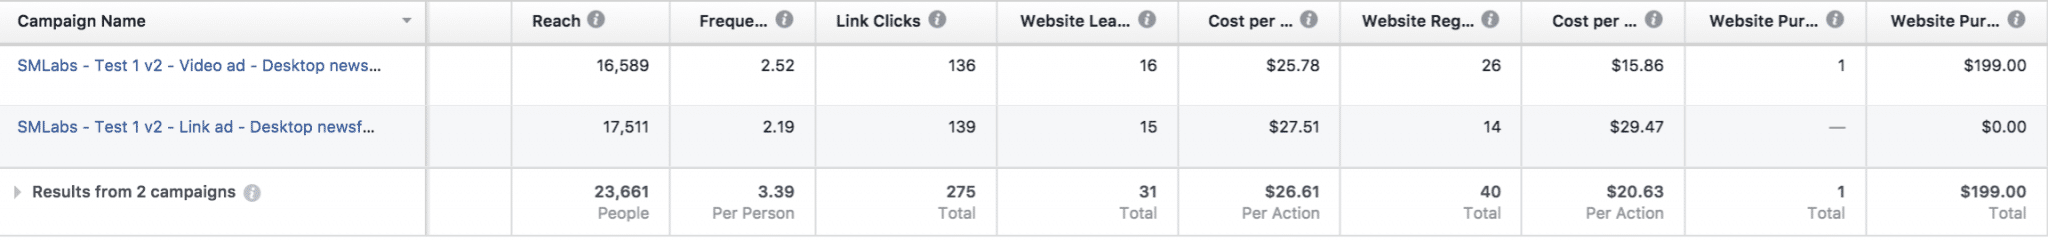 Facebook Ad Results